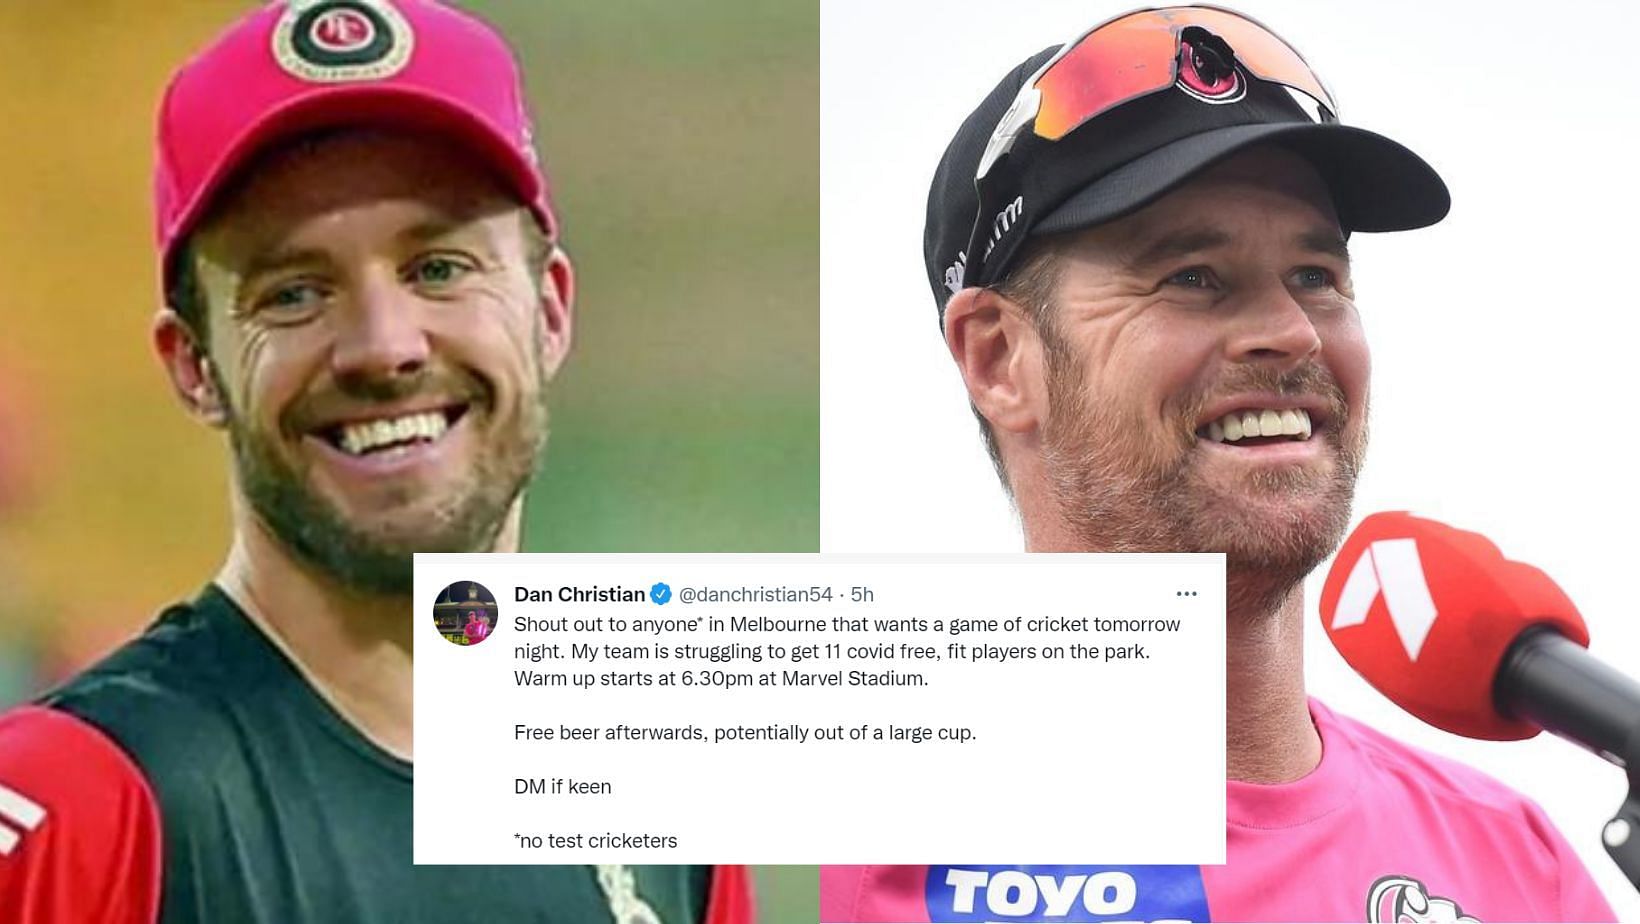 AB de Villiers and Dan Christian engage in cheeky banter on Twitter.